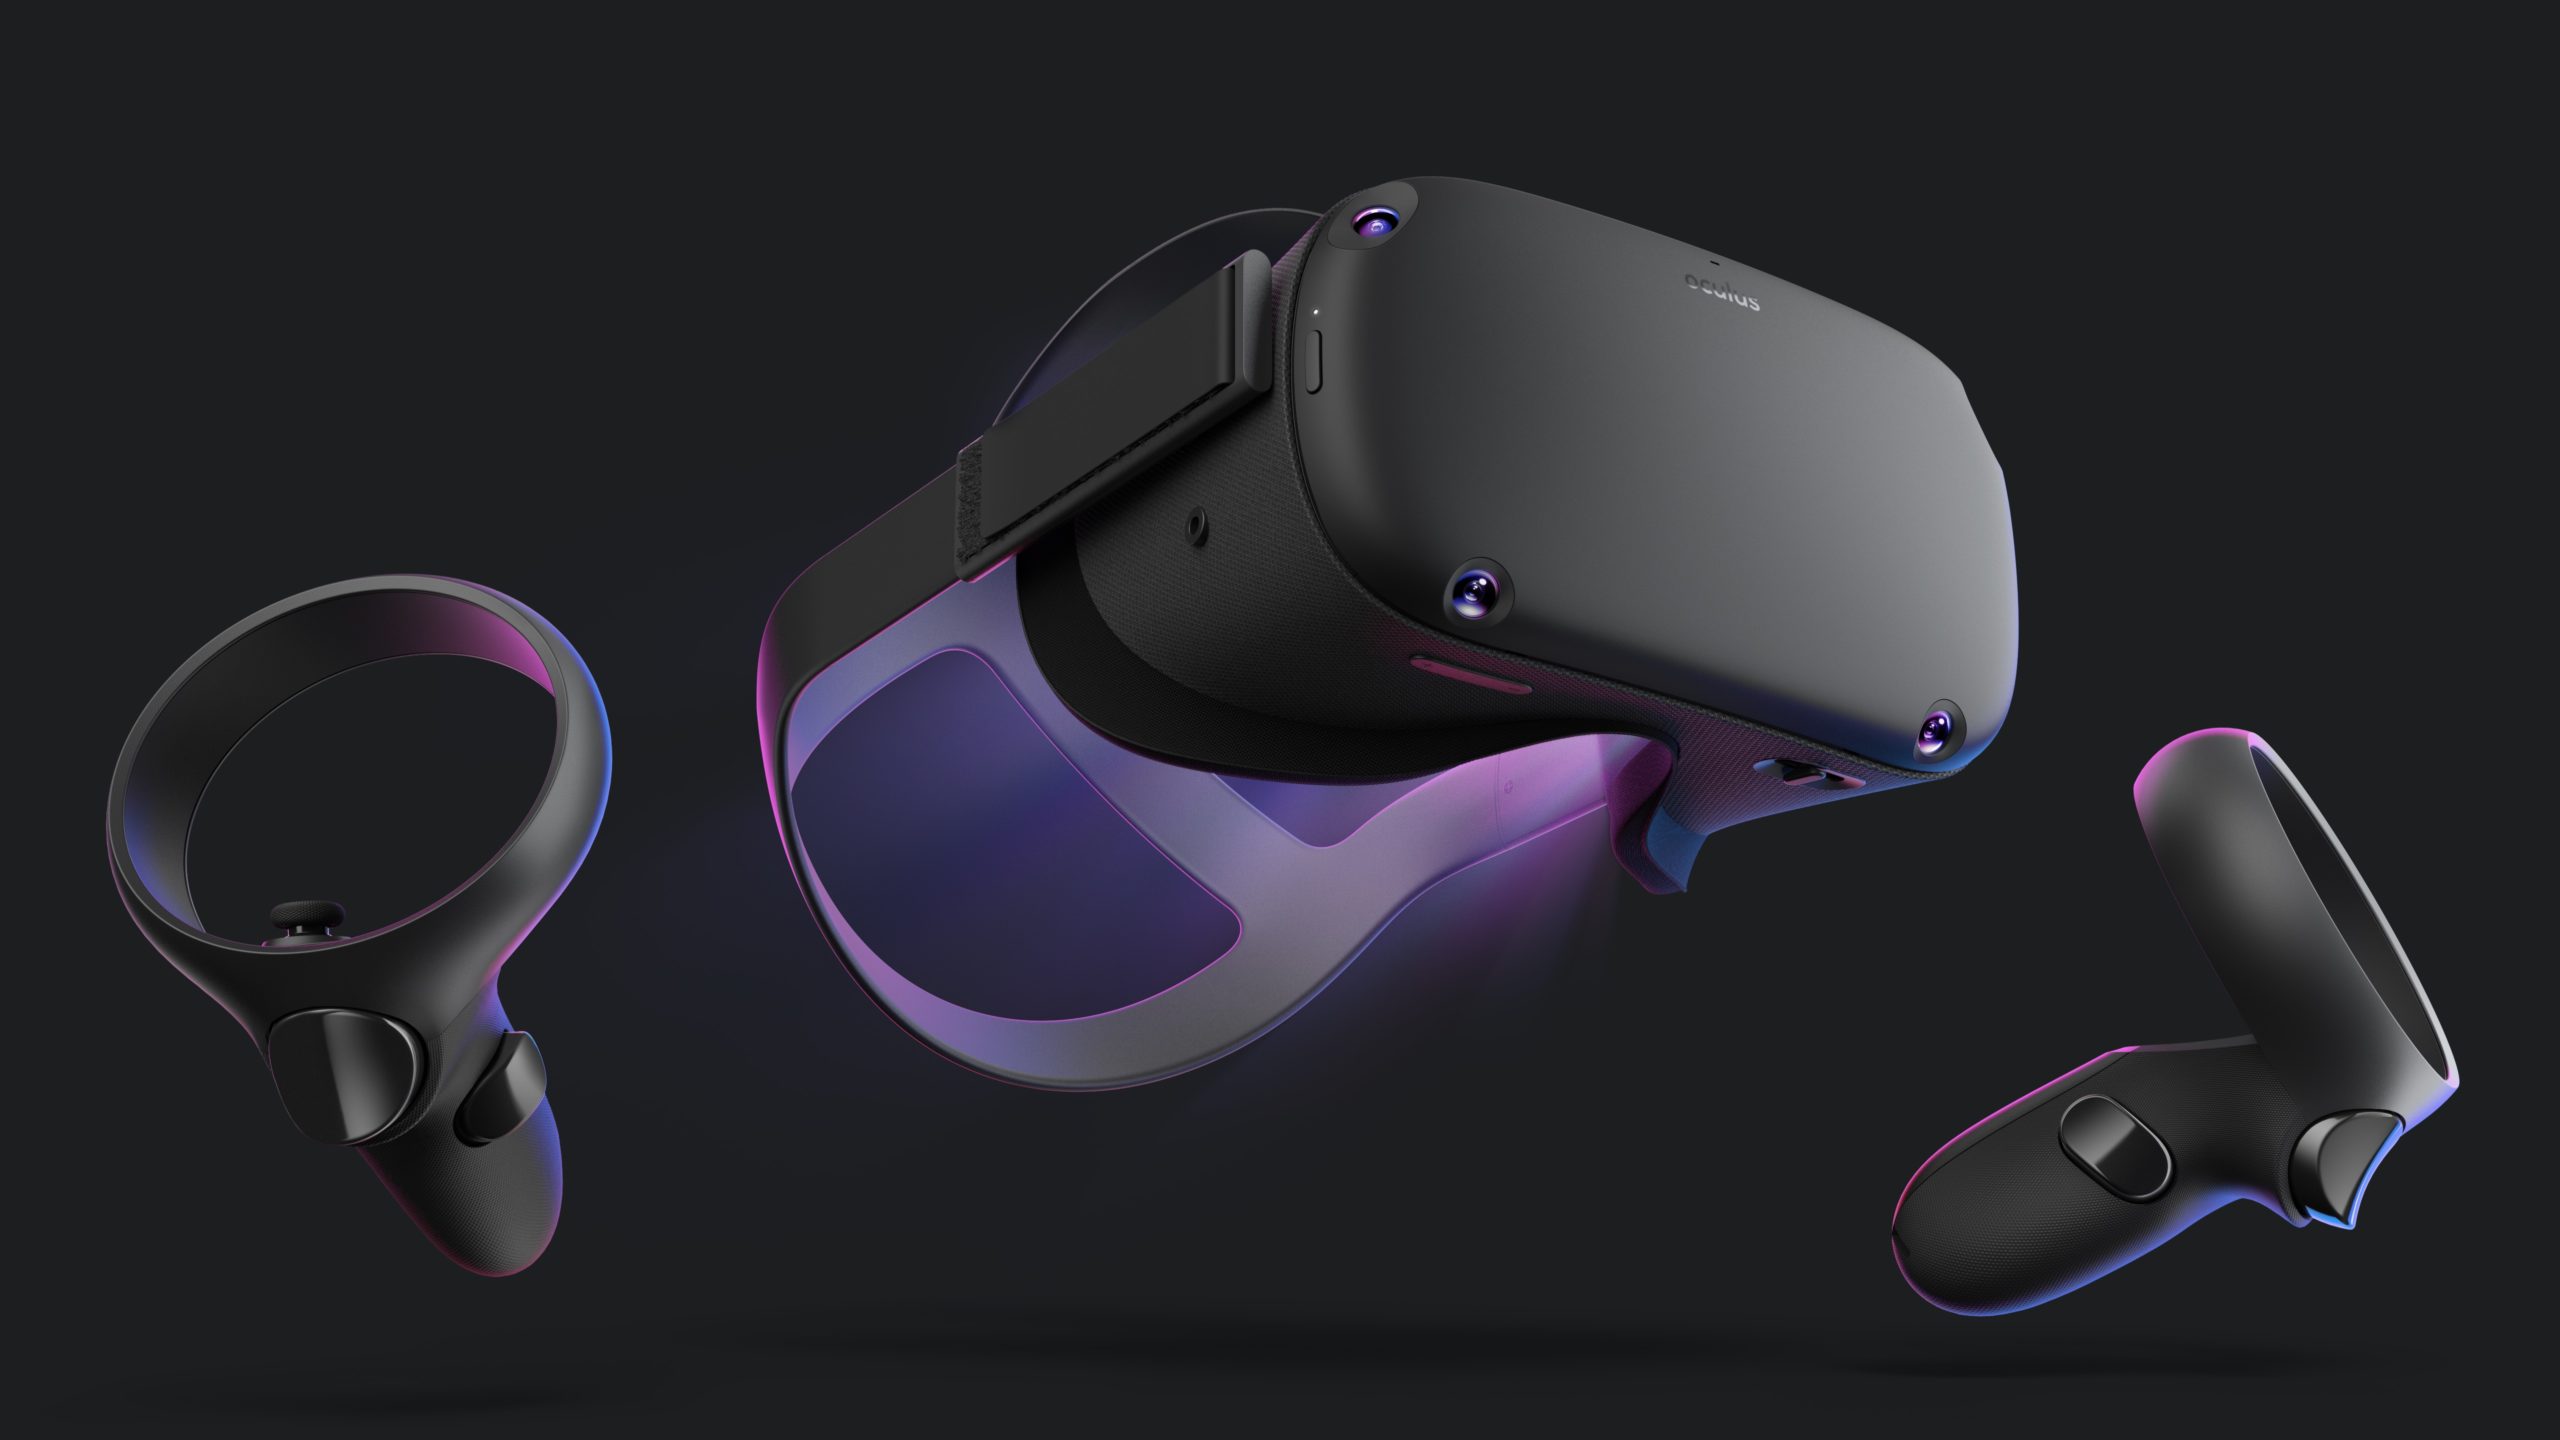 Facebook’s Oculus Reportedly Working on Lighter, Faster Quest VR Headset